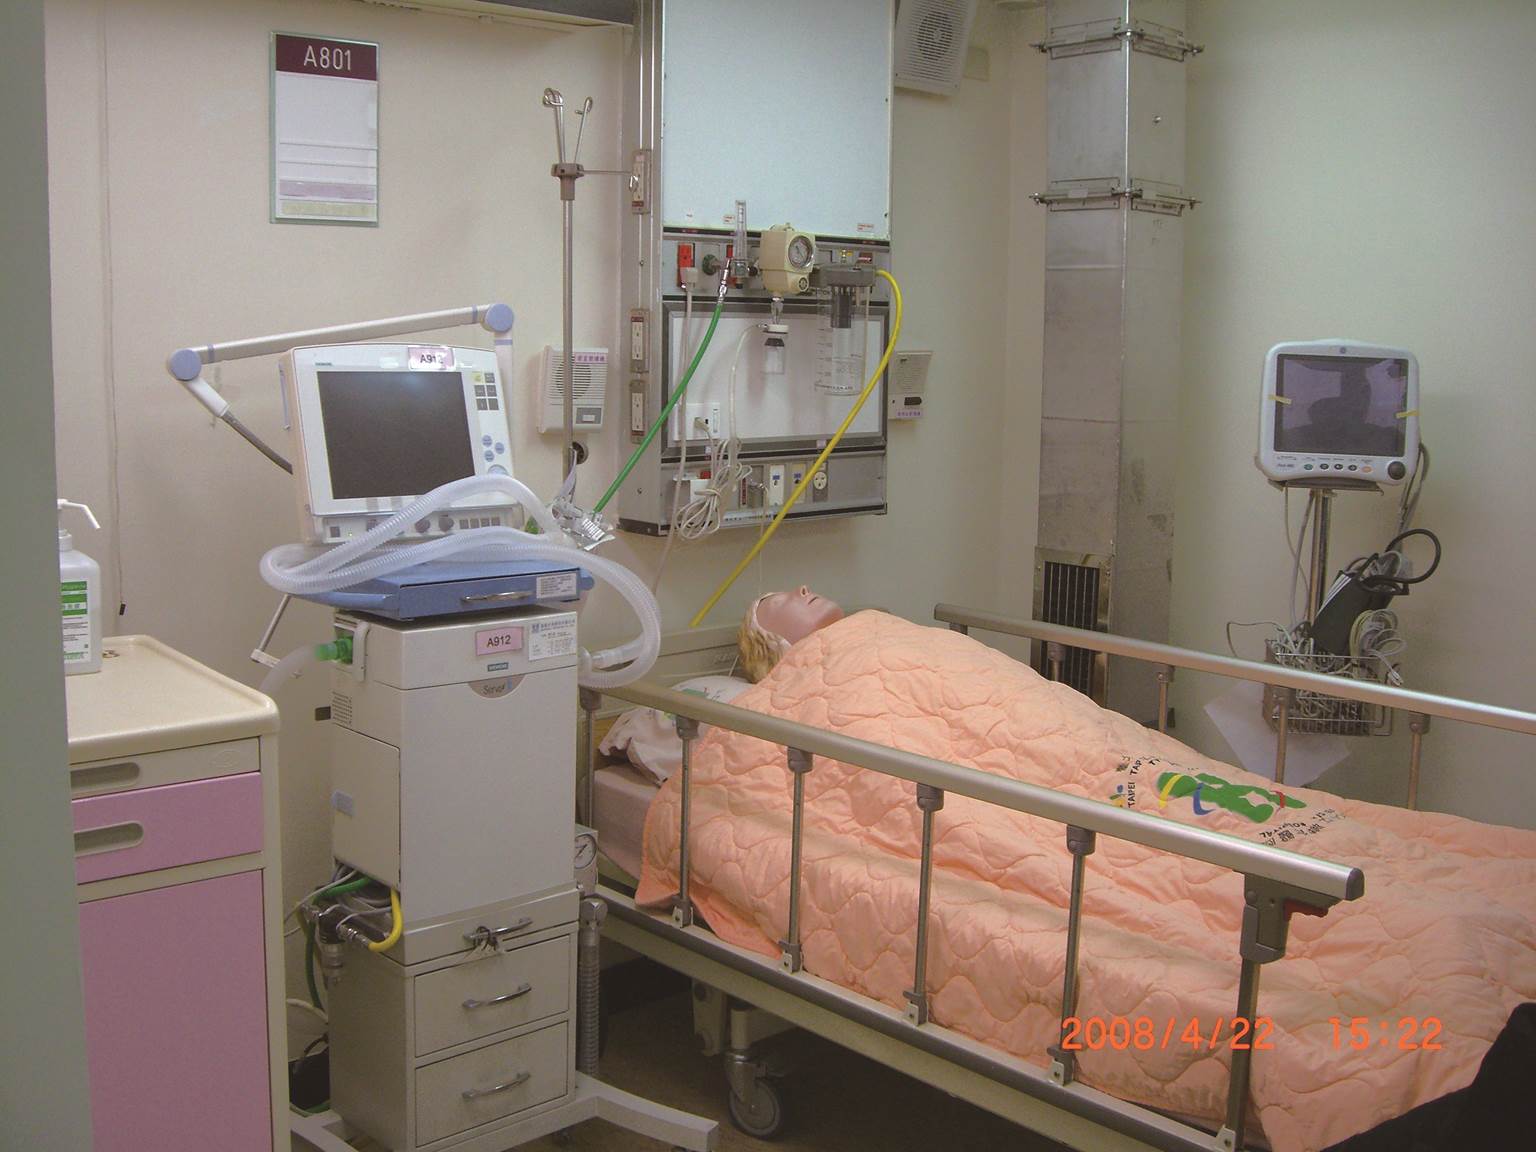 Completion of the Negative Pressure Isolation Ward in Hoping Hospital, 2003